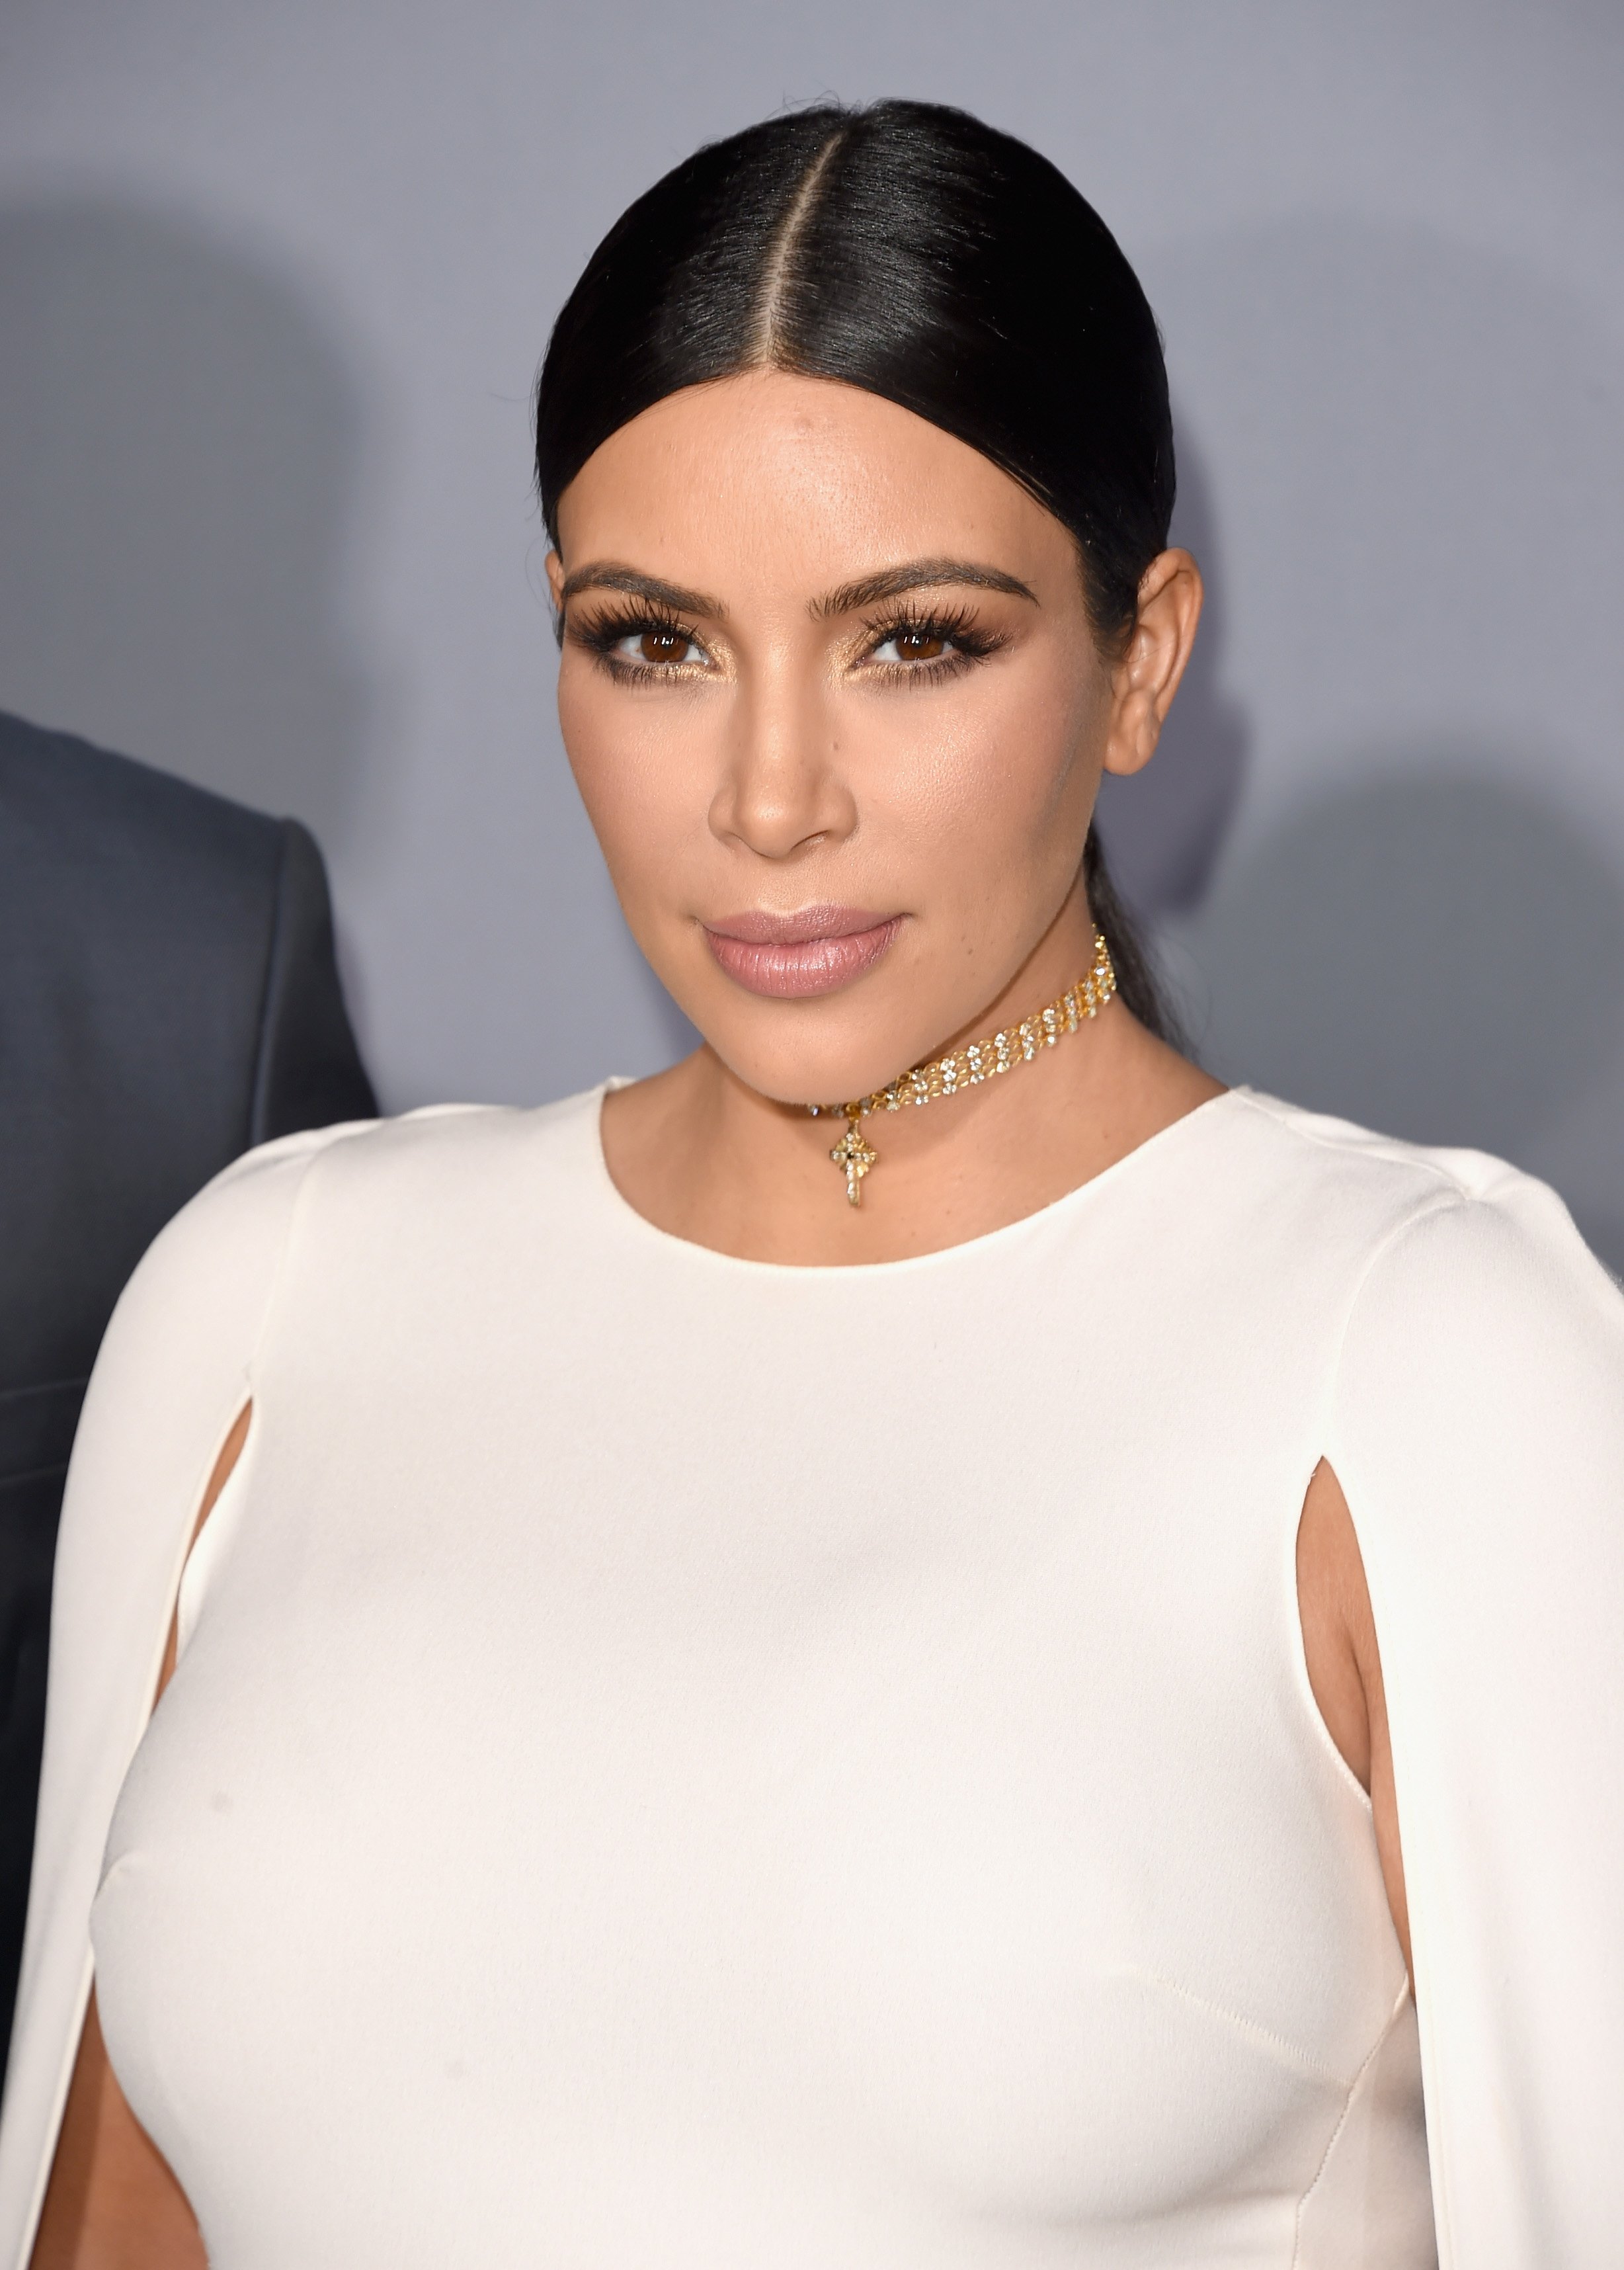 Kim Kardashian on the red carpet of the InStyle Awards in October 2015. | Photo: Getty Images